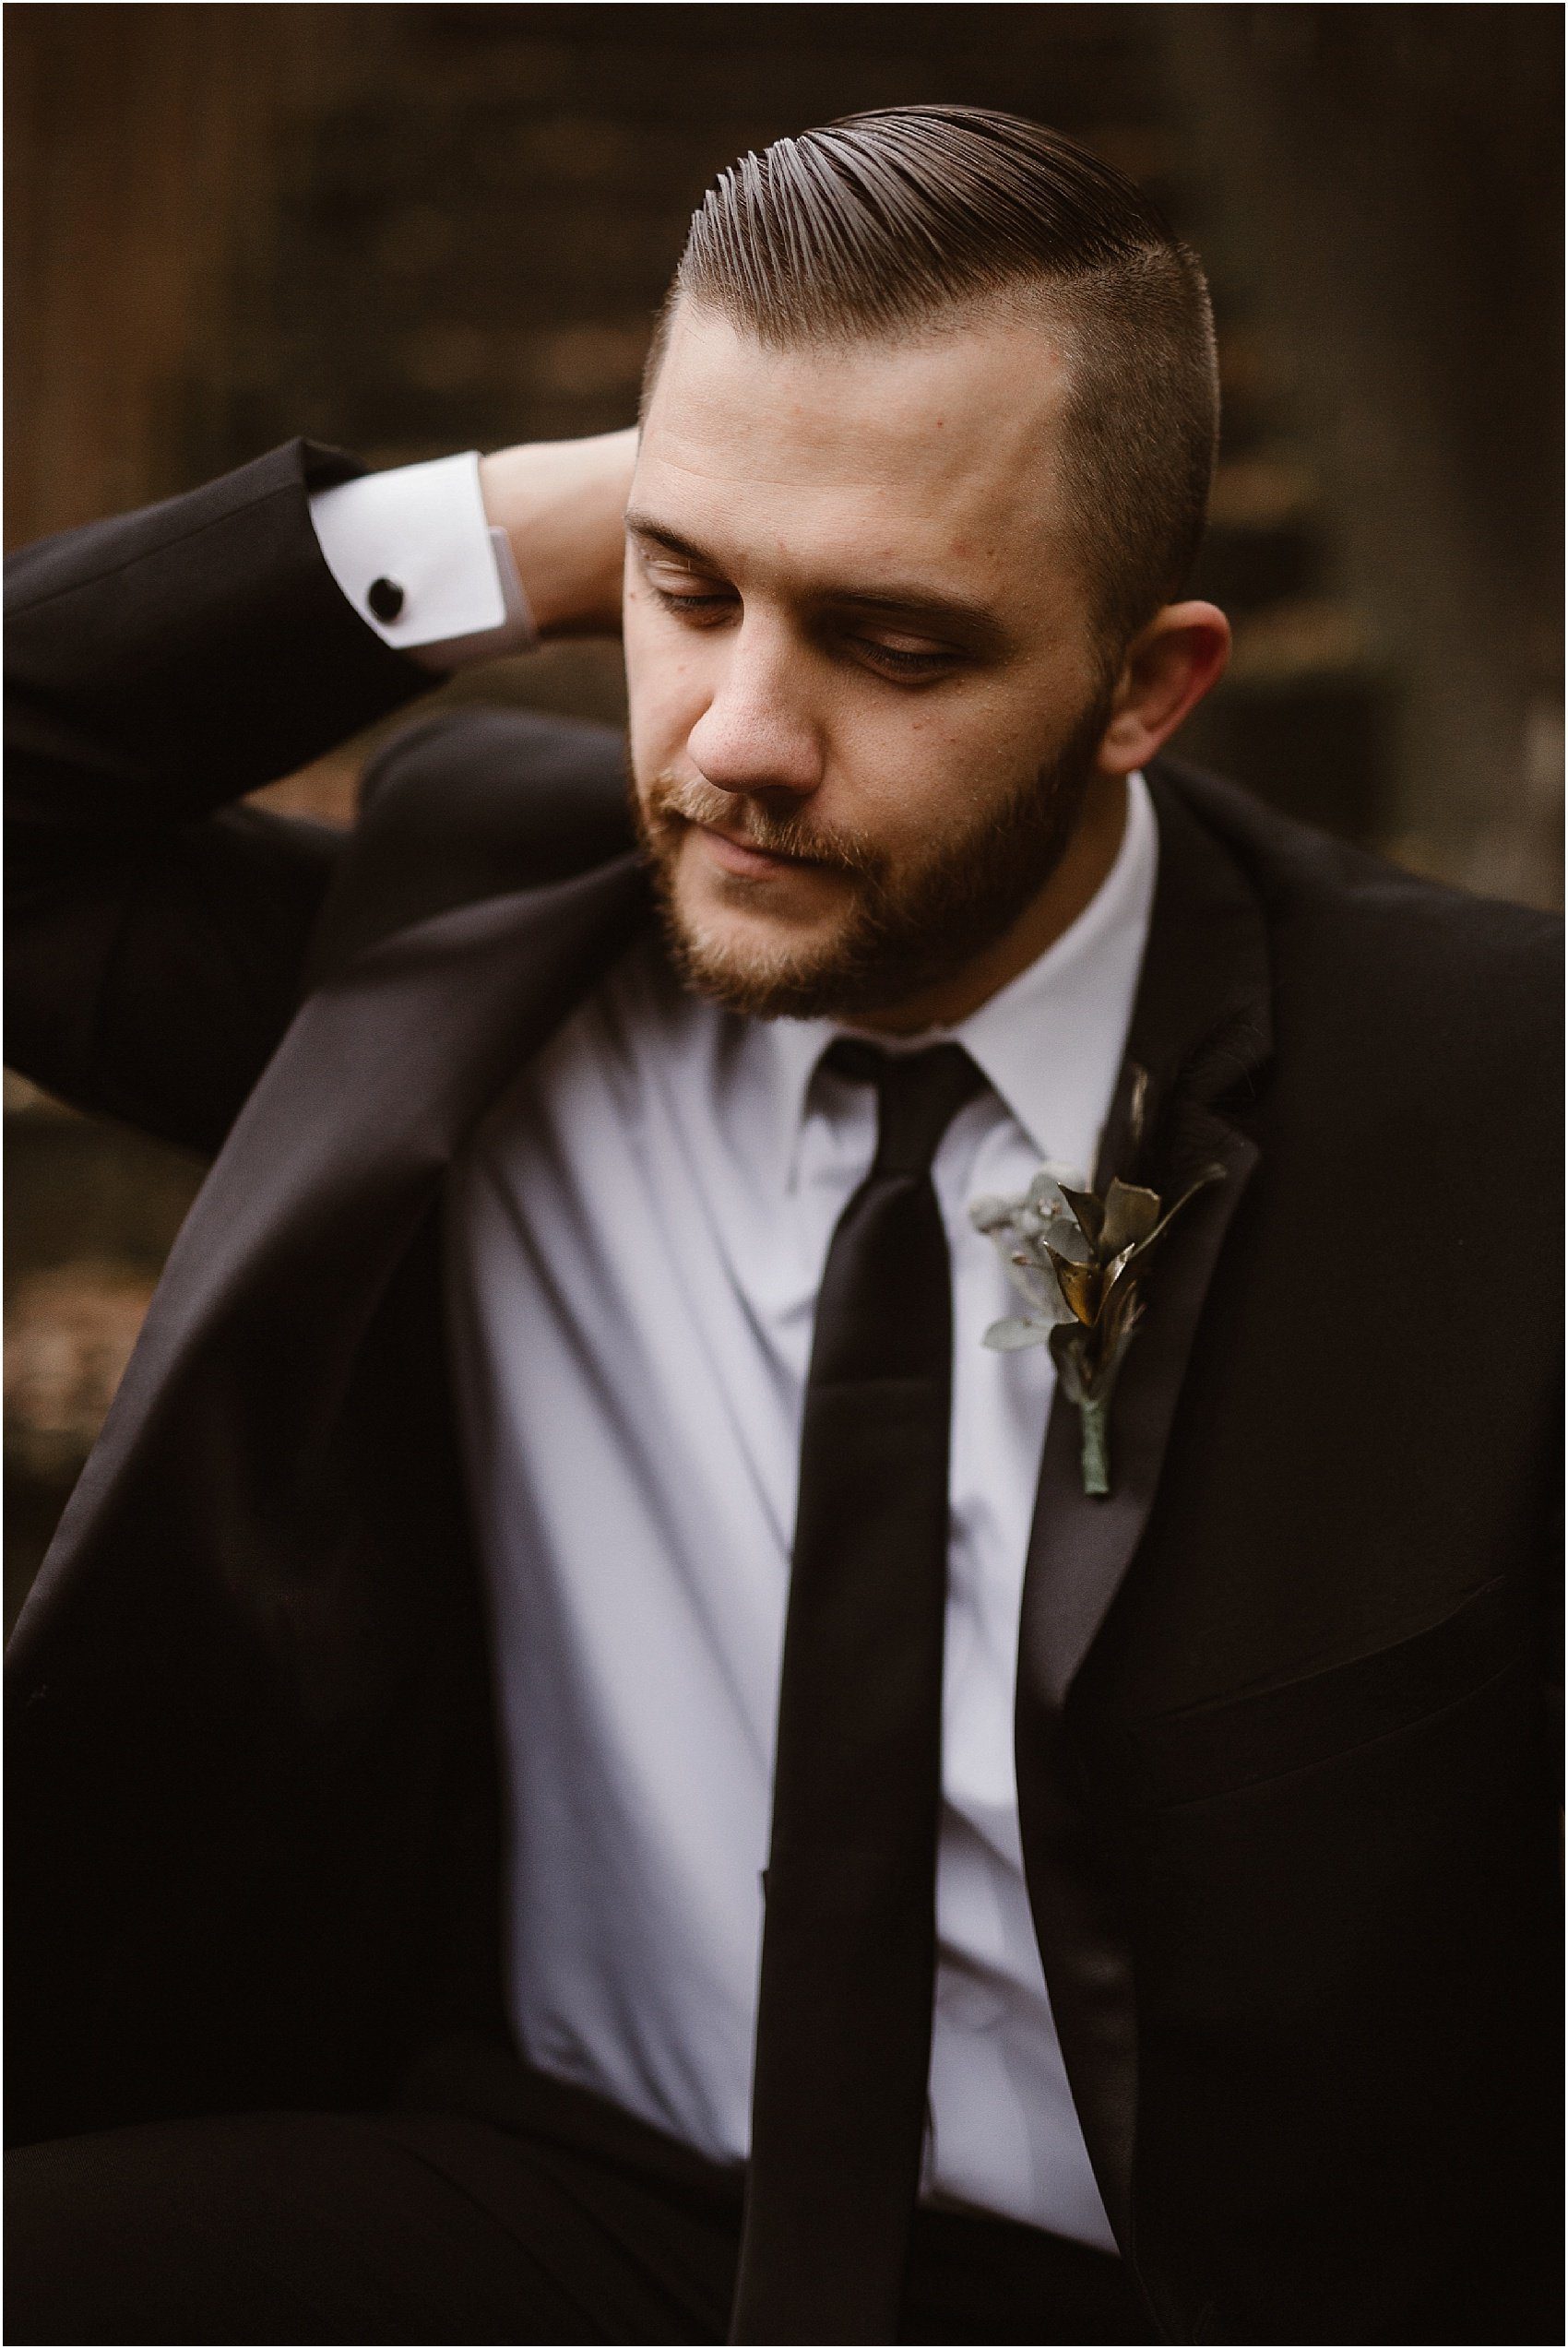 man swoops hand through hair while wearing black wedding suit with boutonniere 